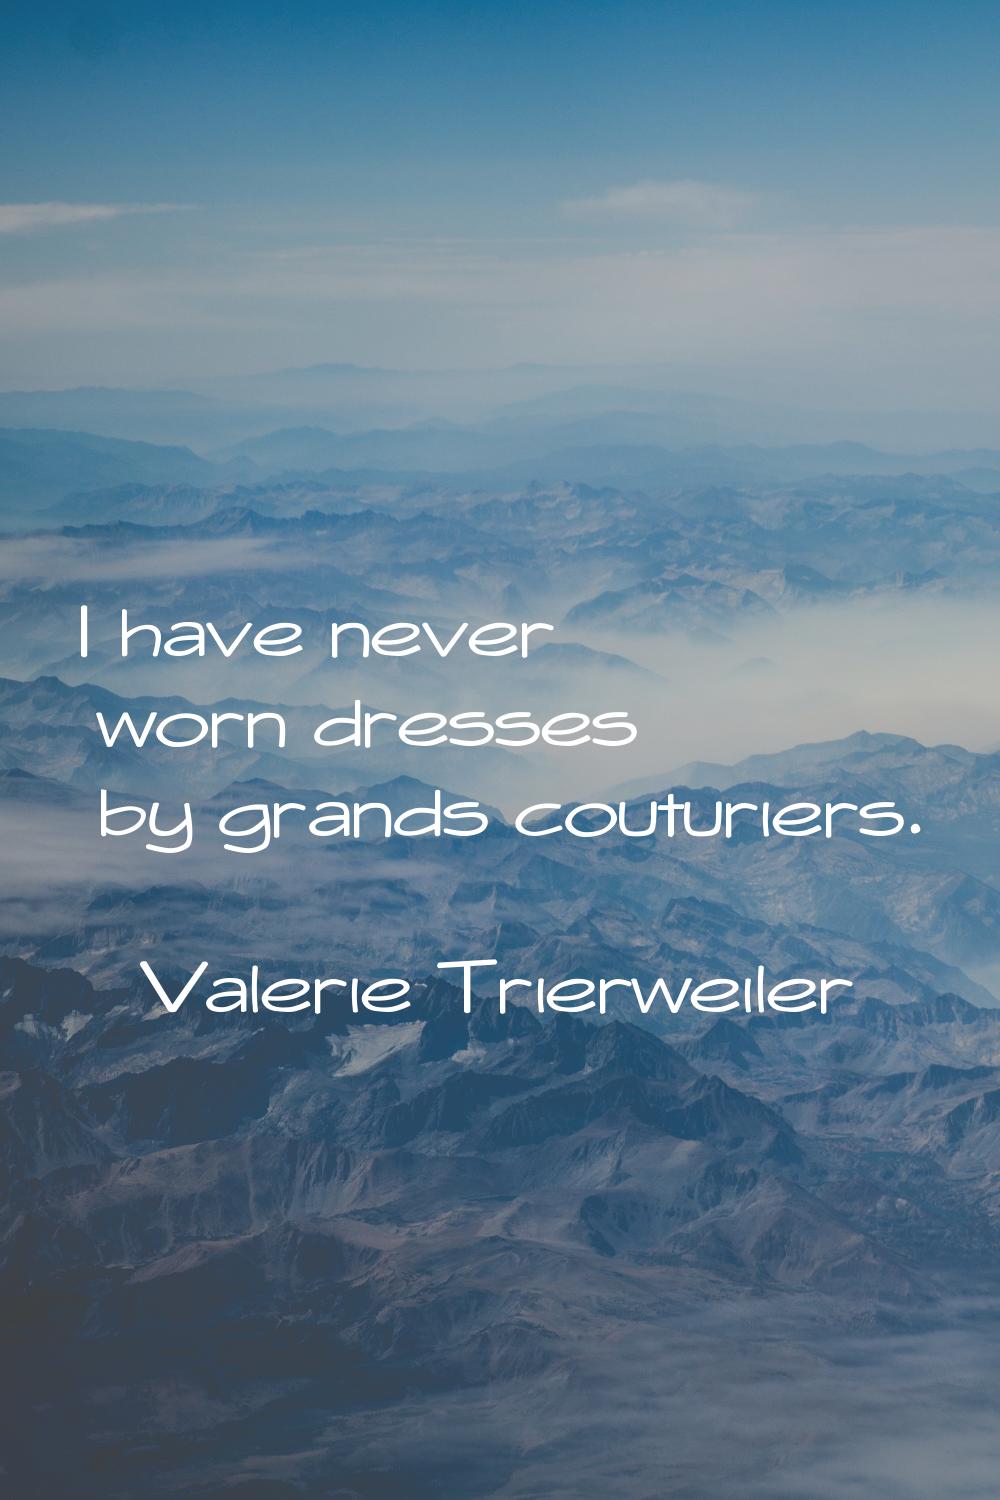 I have never worn dresses by grands couturiers.